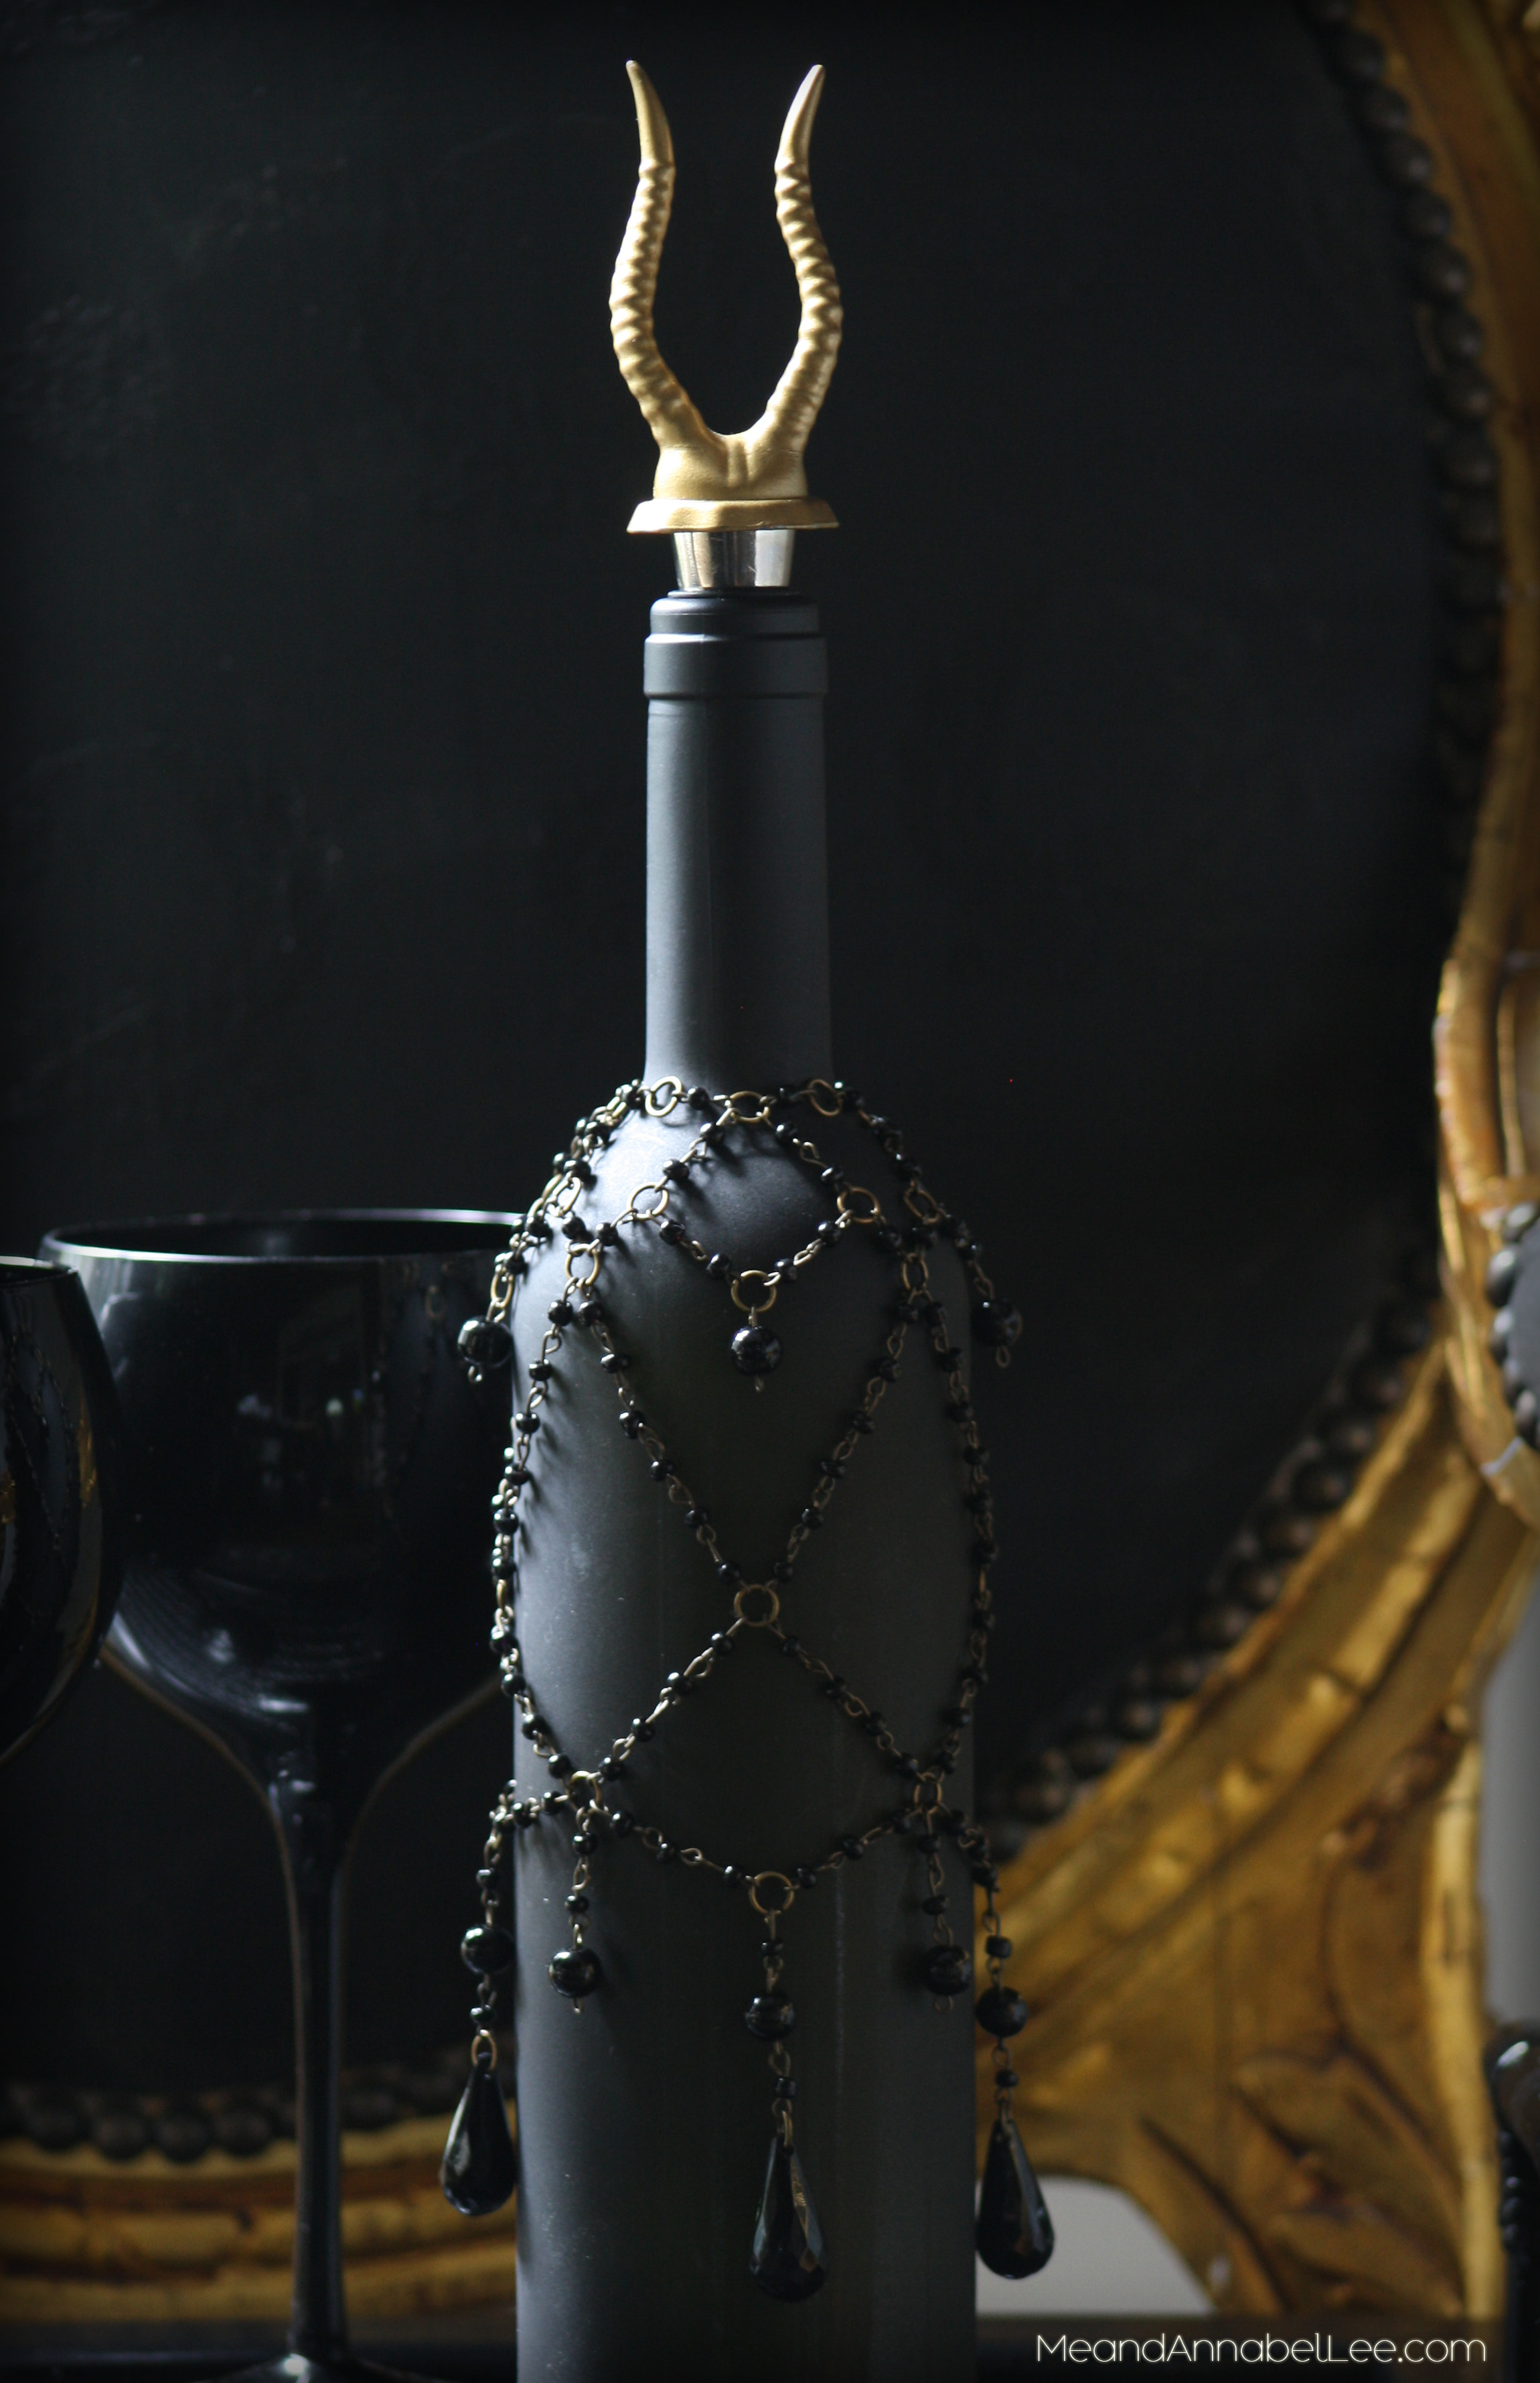 Gothic Glam Beaded Wine Bottle Cover - Goth It yourself - Black & Gold Entertaining - www.MeandAnnabelLee.com - Blog for all things Dark, Gothic, Victorian, & Unusual